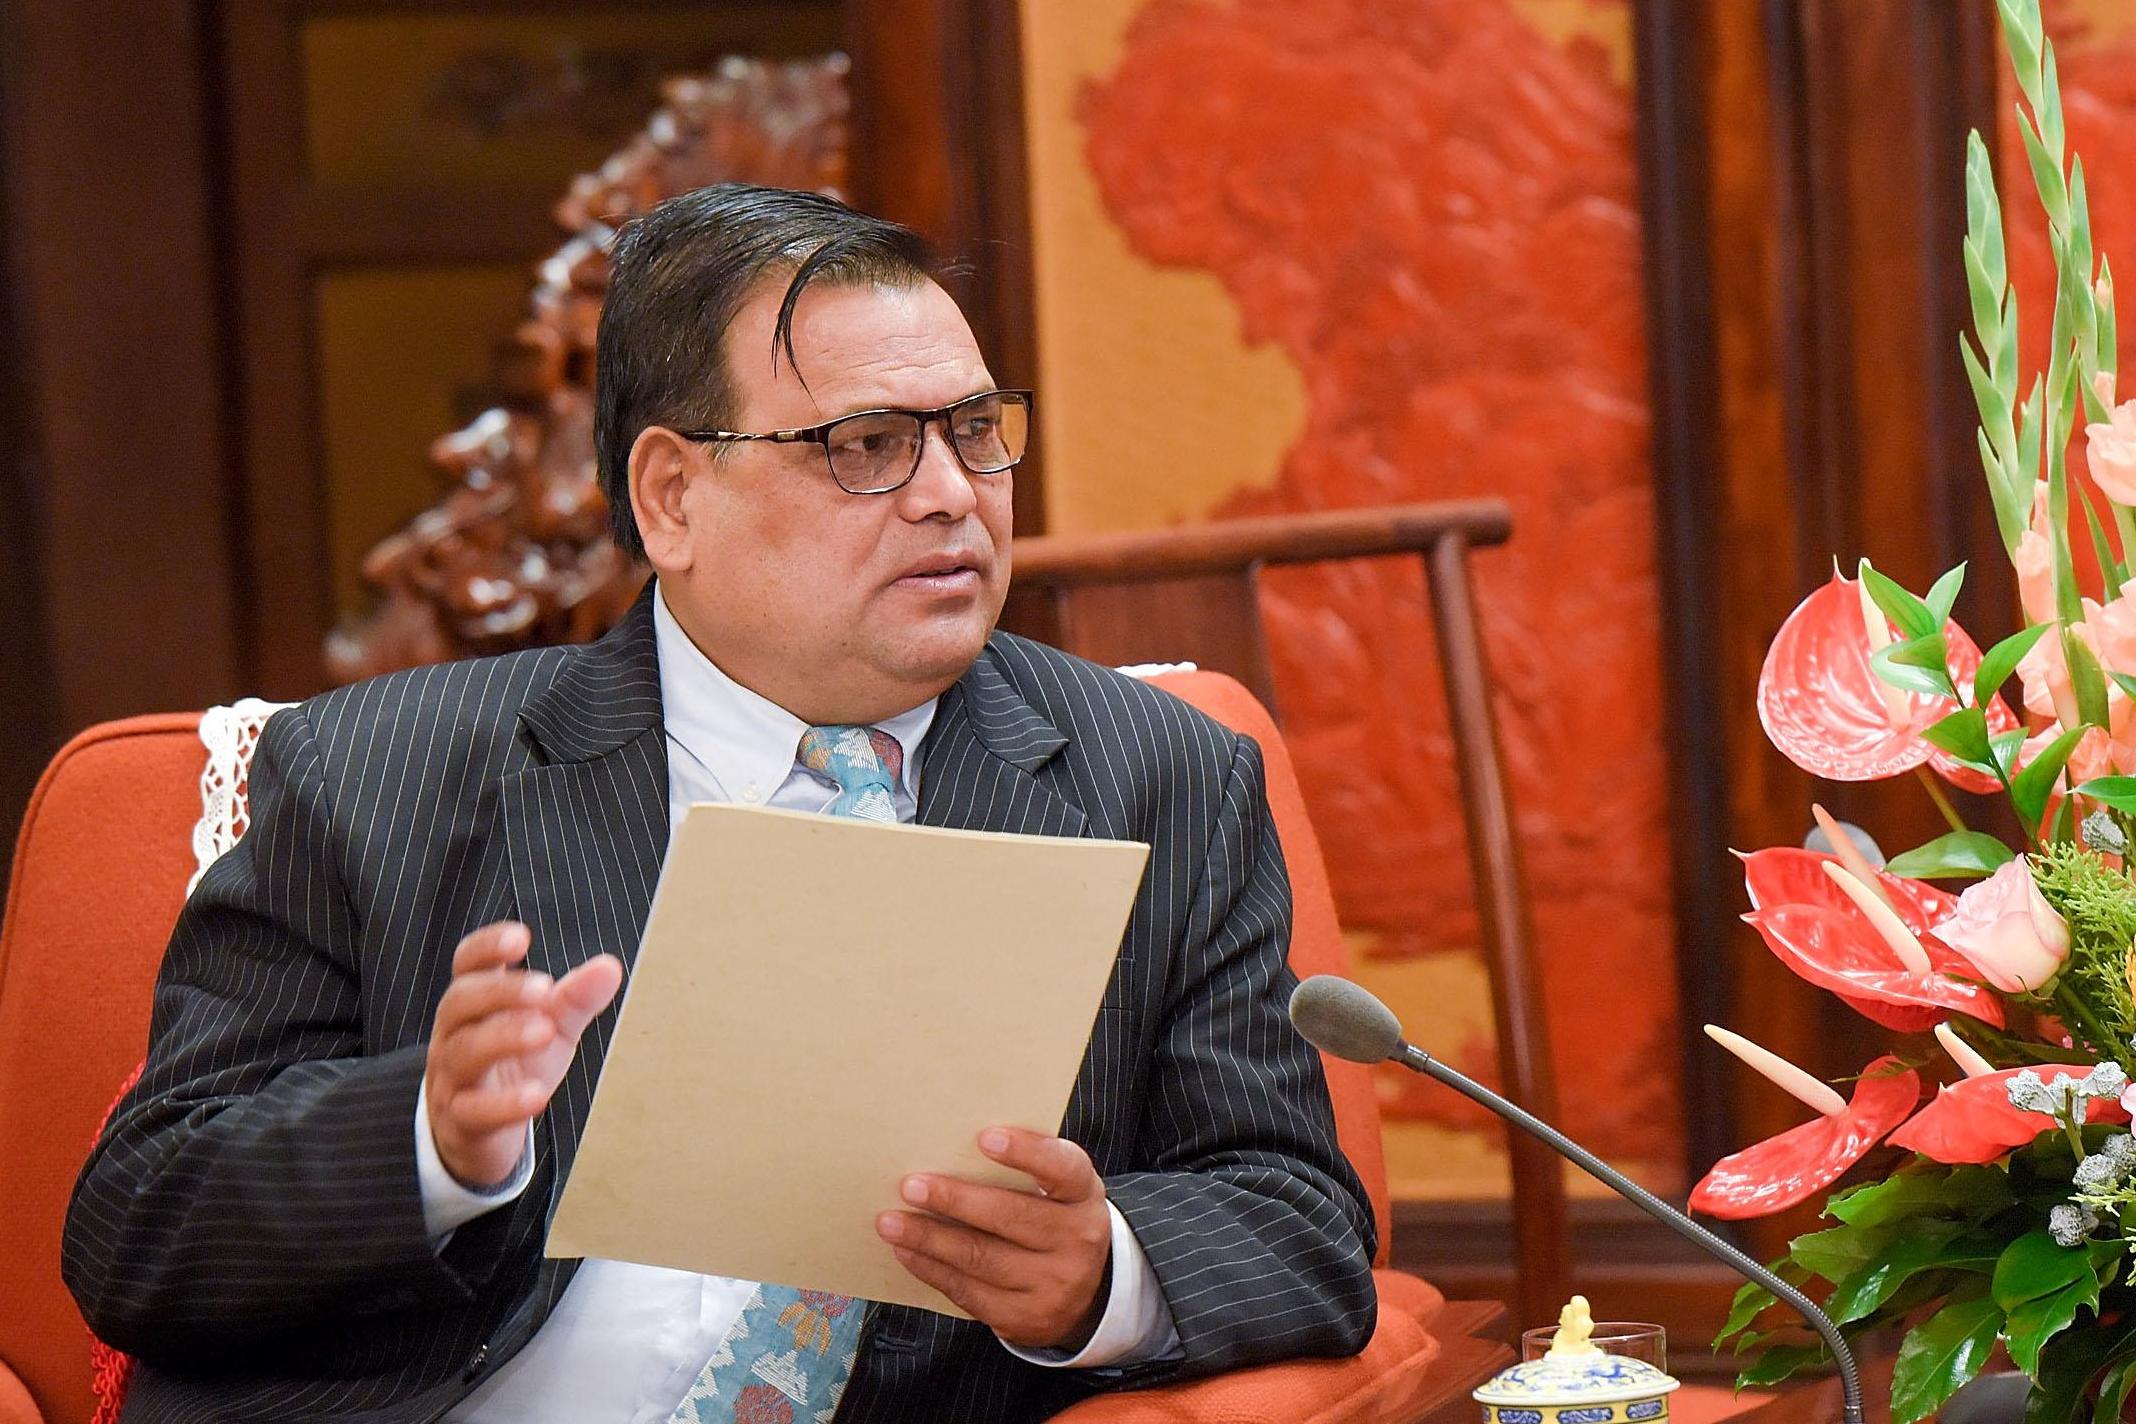 Krishna Bahadur Mahara has served as the deputy prime minister, information minister and home minister in Nepal